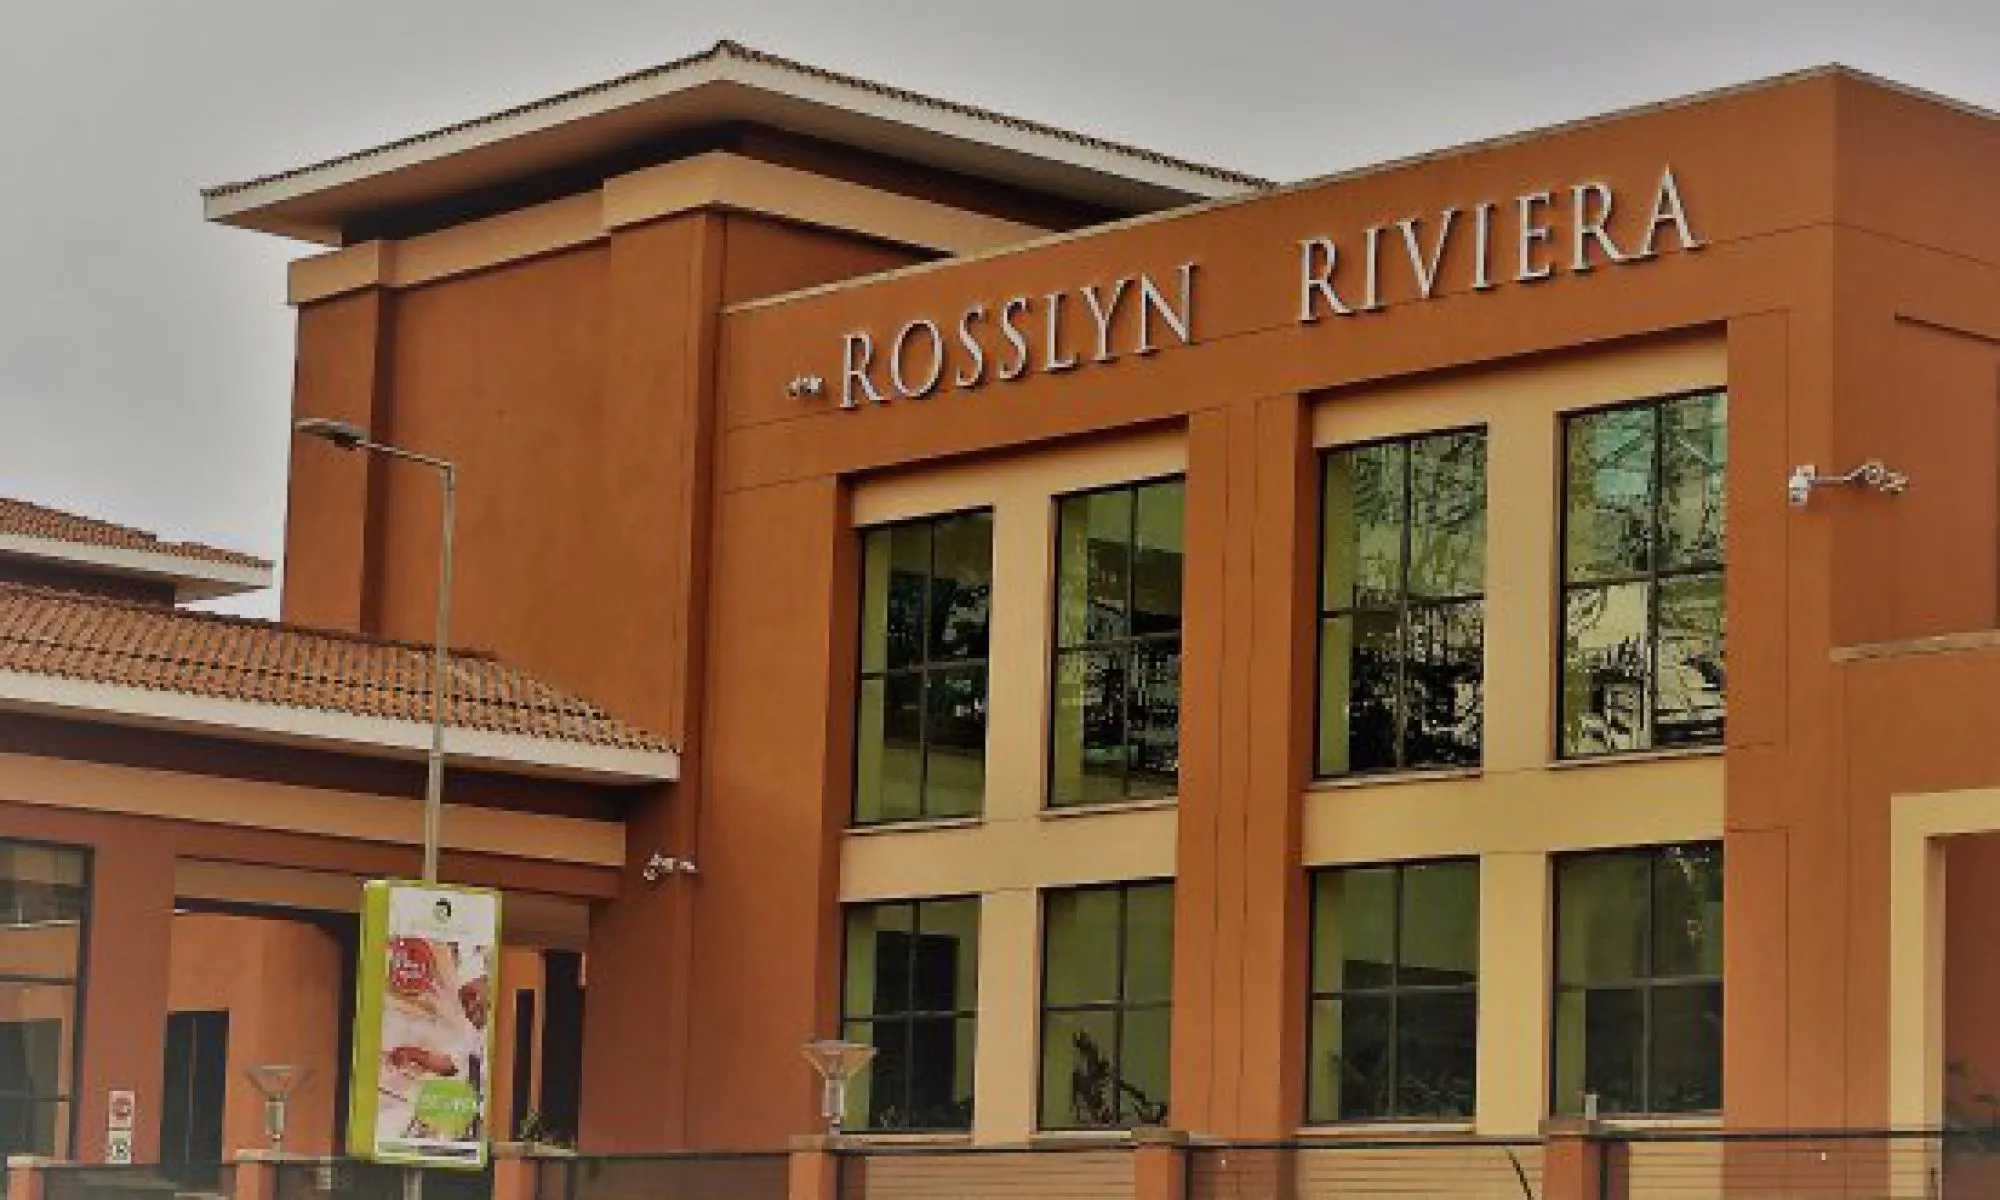 Rosslyn Riviera Mall in Kenya, africa | Fragrance,Handbags,Shoes,Accessories,Clothes,Cosmetics,Swimwear - Country Helper